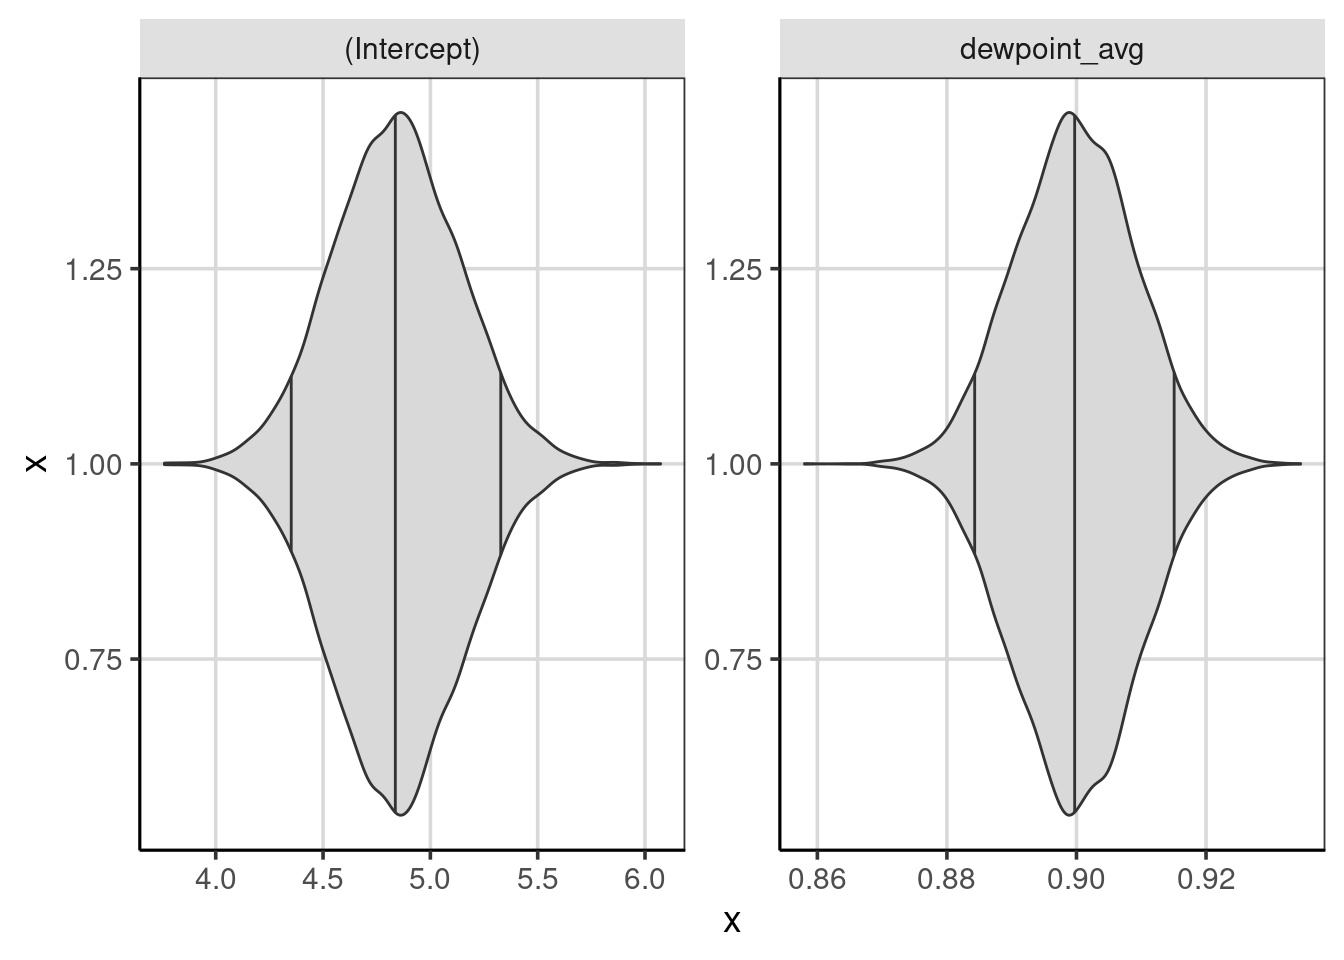 Violin plots showing the distribution of regression coefficients from the bootstrapped samples, with percentiles.